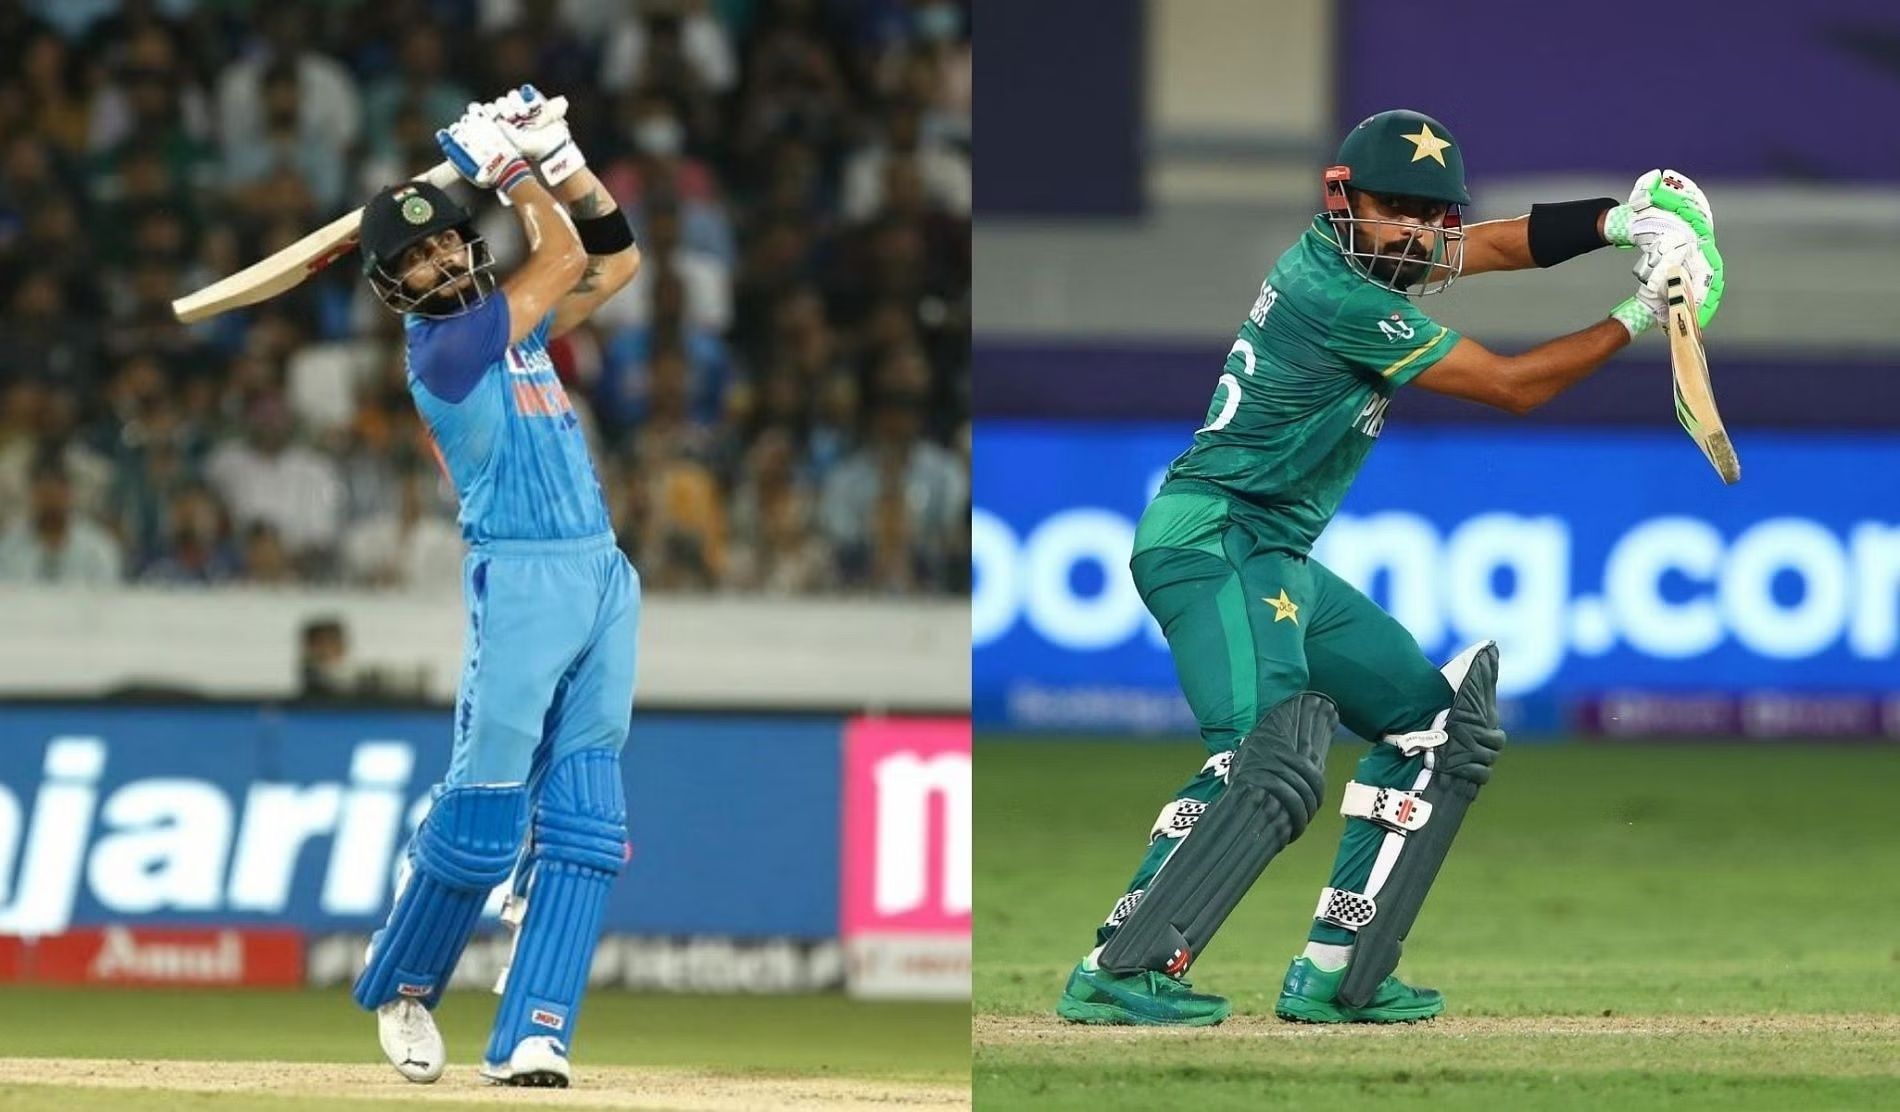 Both India and Pakistan have a few formidable batters in their lineup.